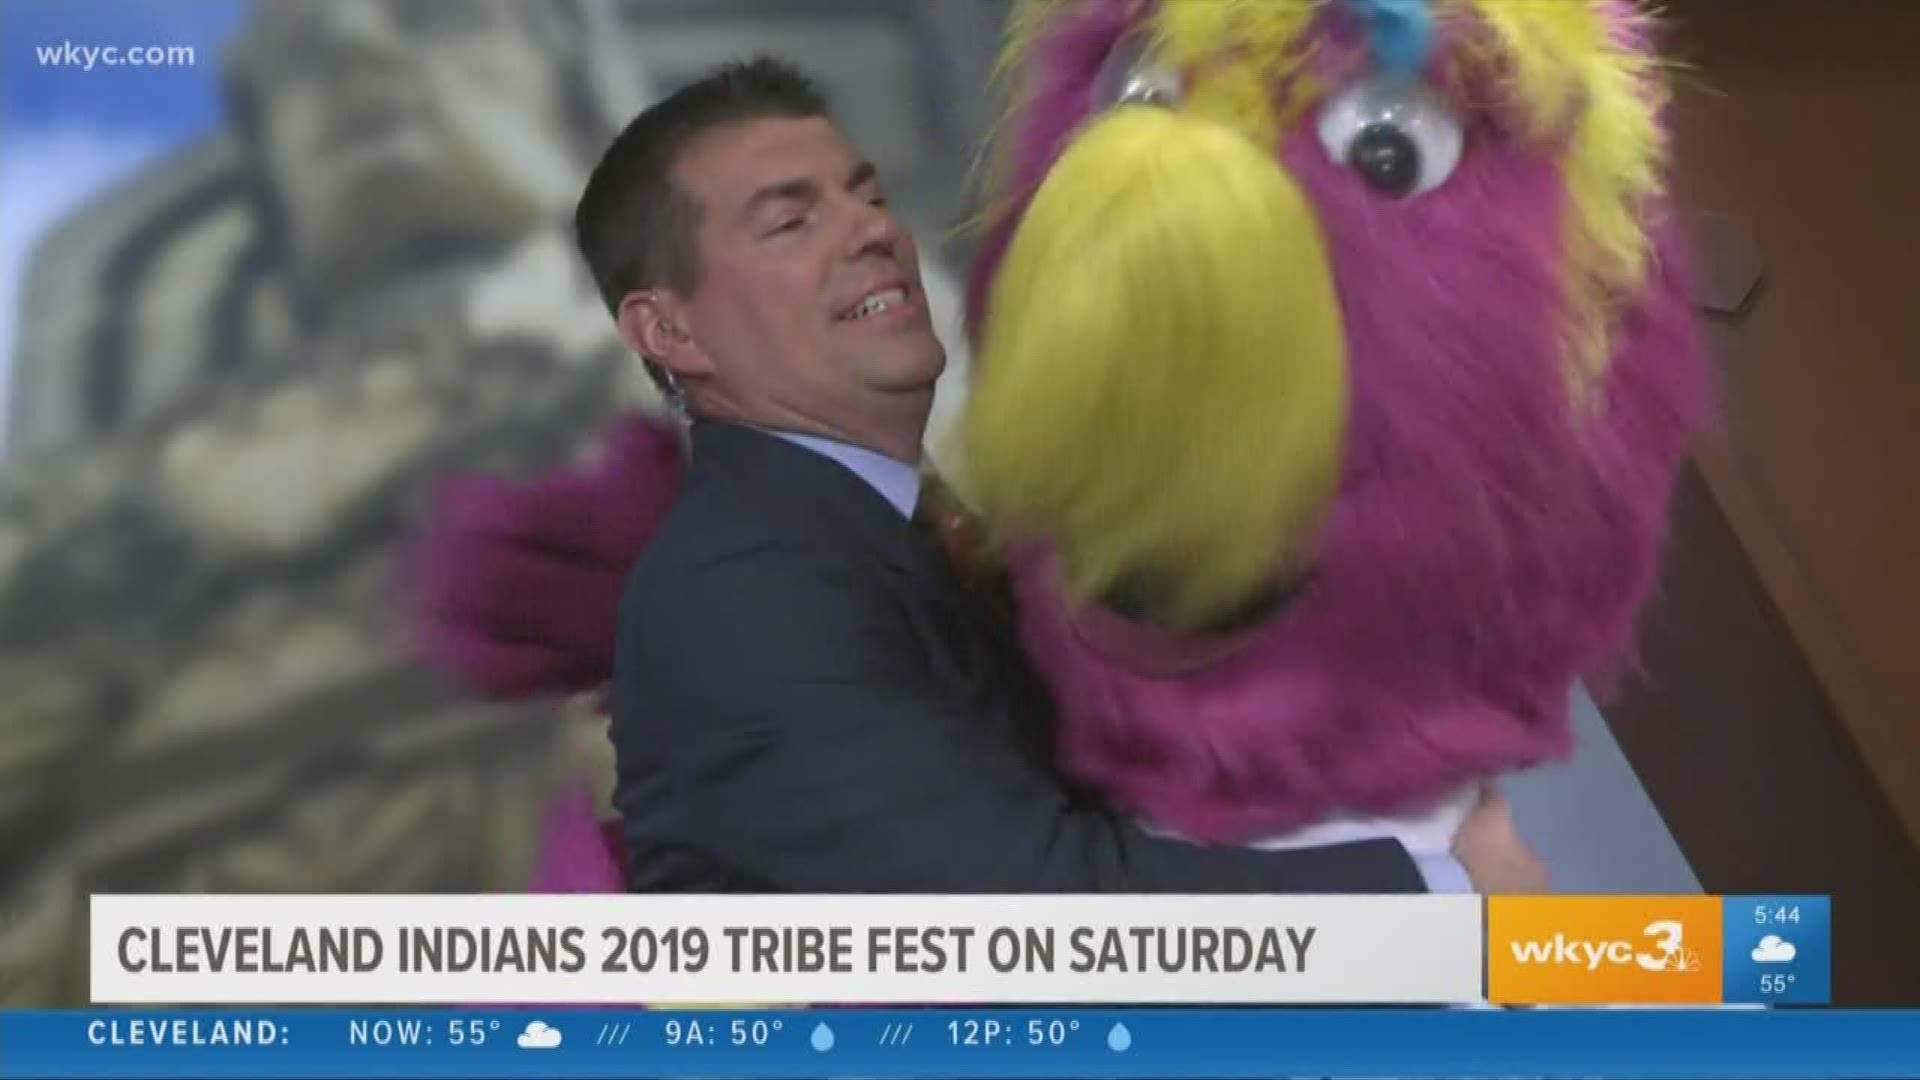 Jan. 11, 2019: That's a wrap on another exciting week for the WKYC morning team. Take a peek back at some of our favorite moments.